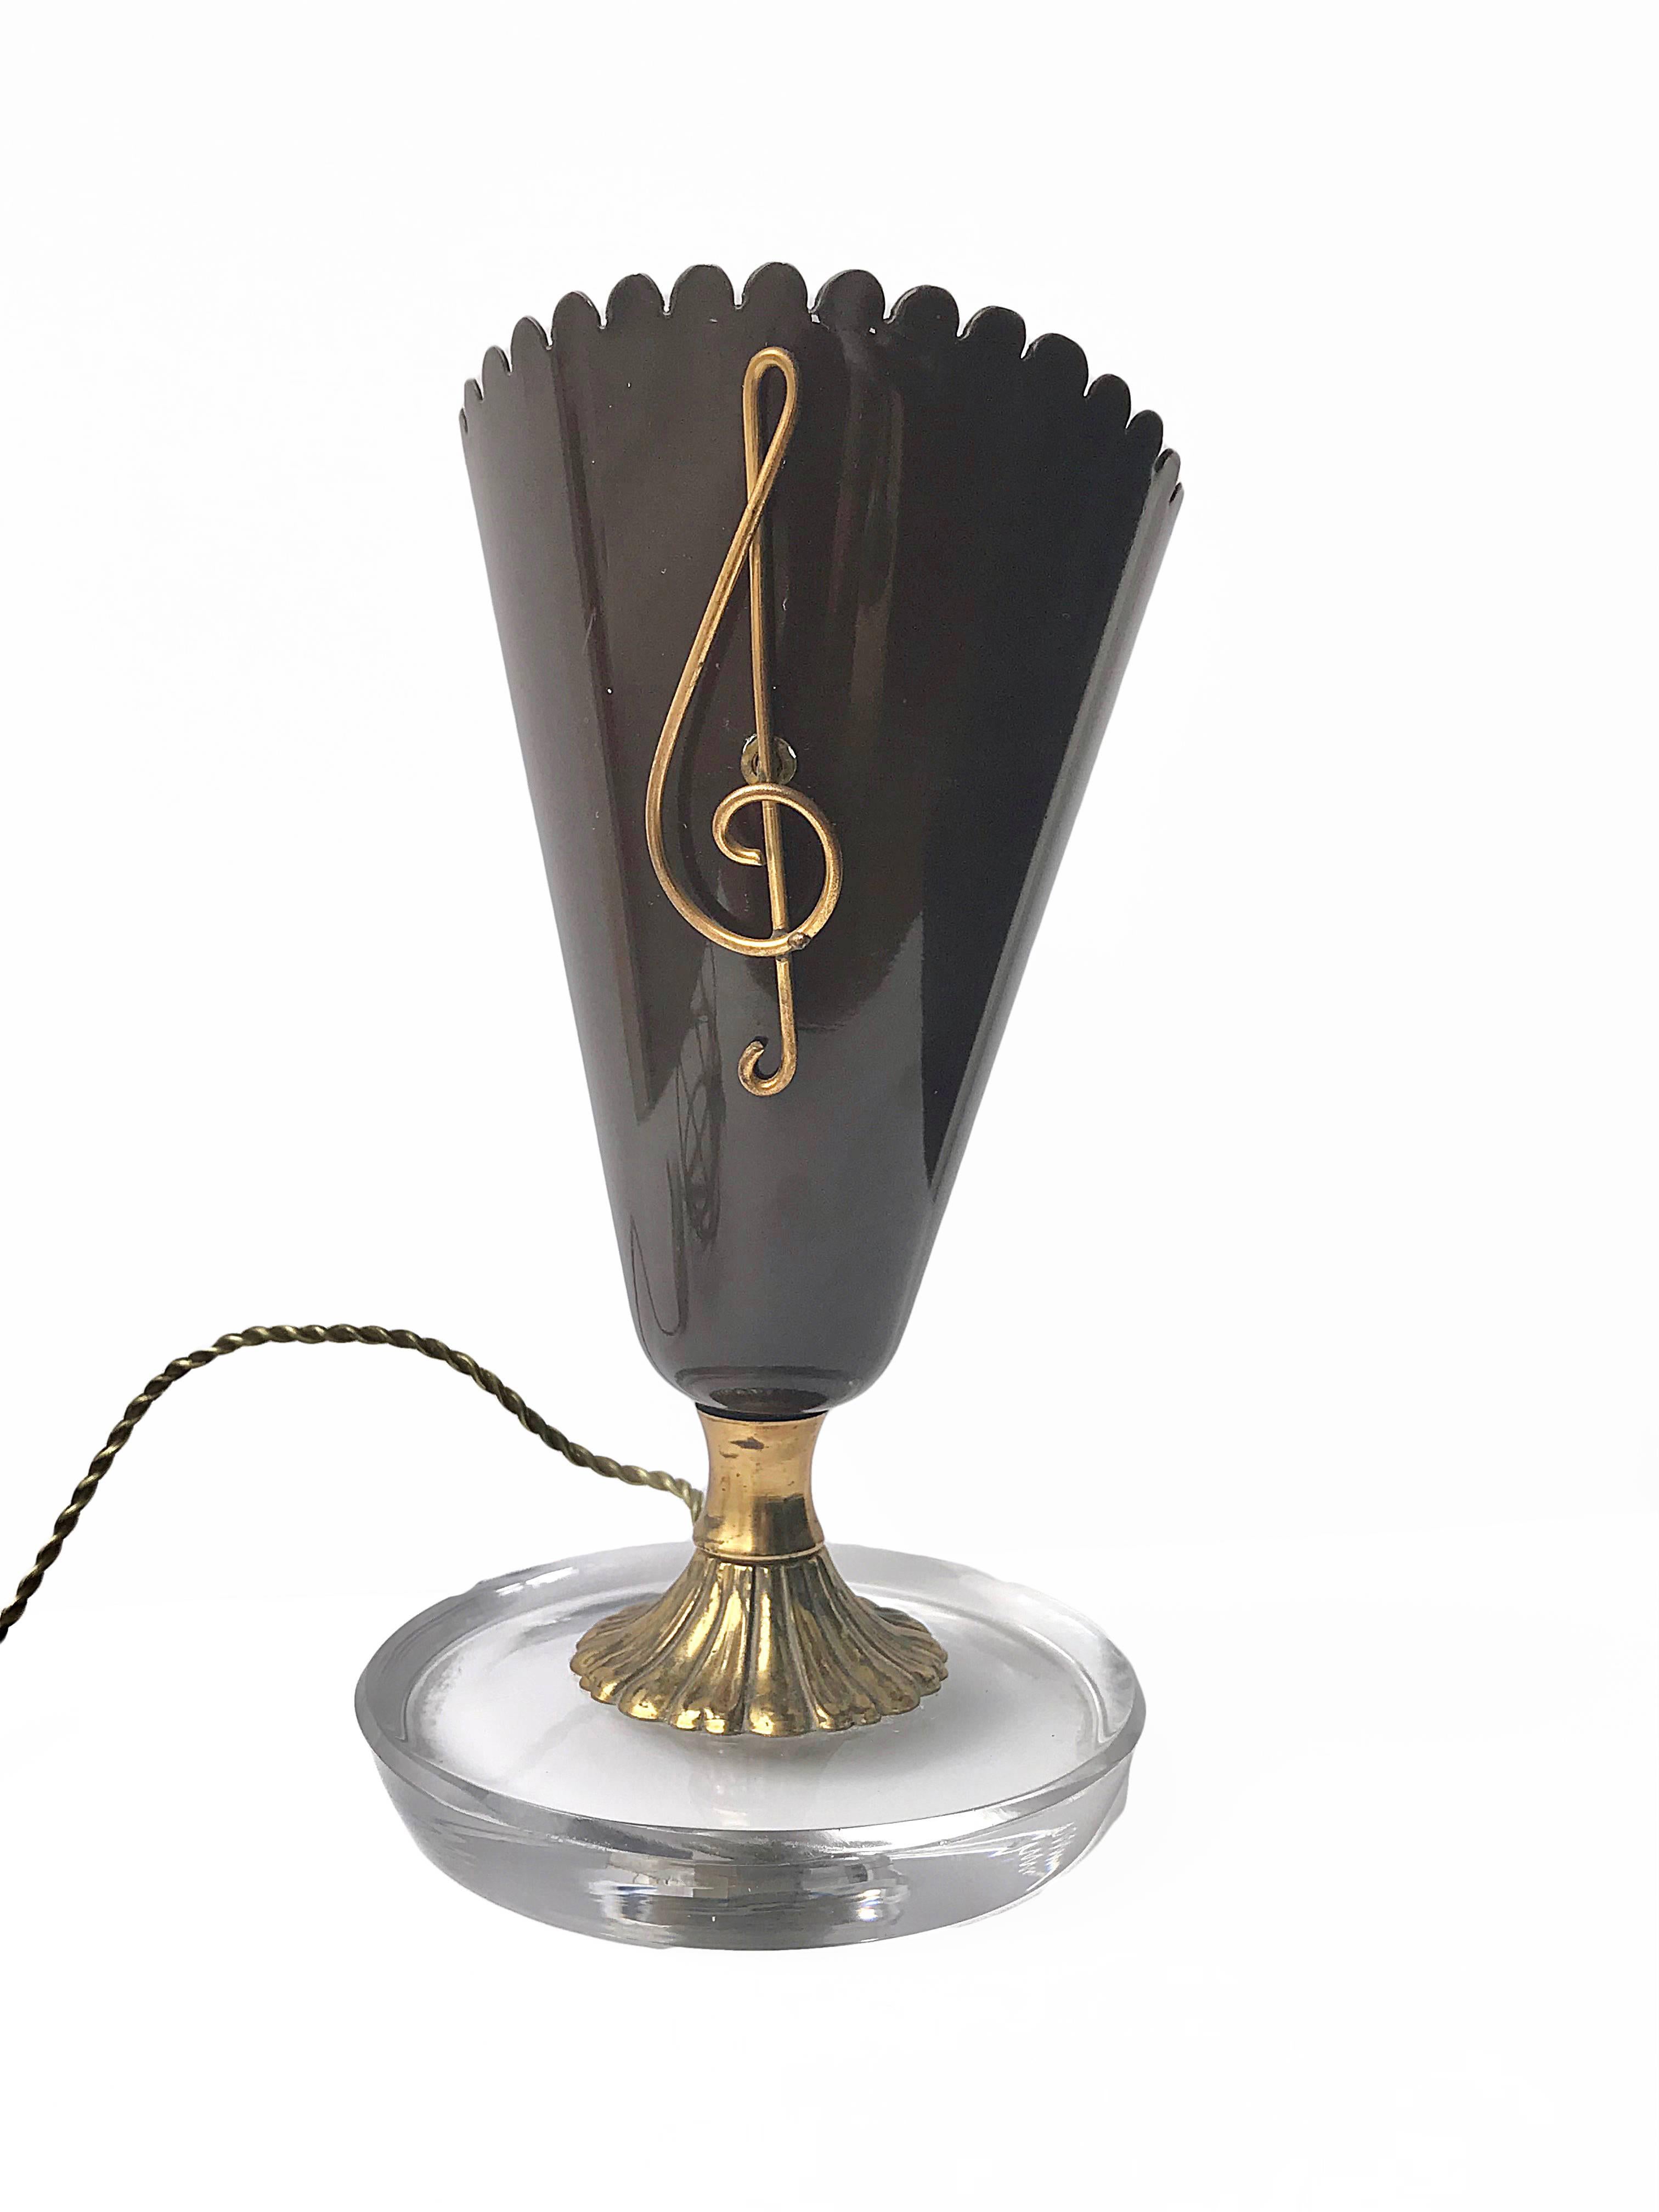 Beautiful table lamp with glass and brass base. Dark brown color. Musical note in brass. Gio Ponti style of the 1950s.